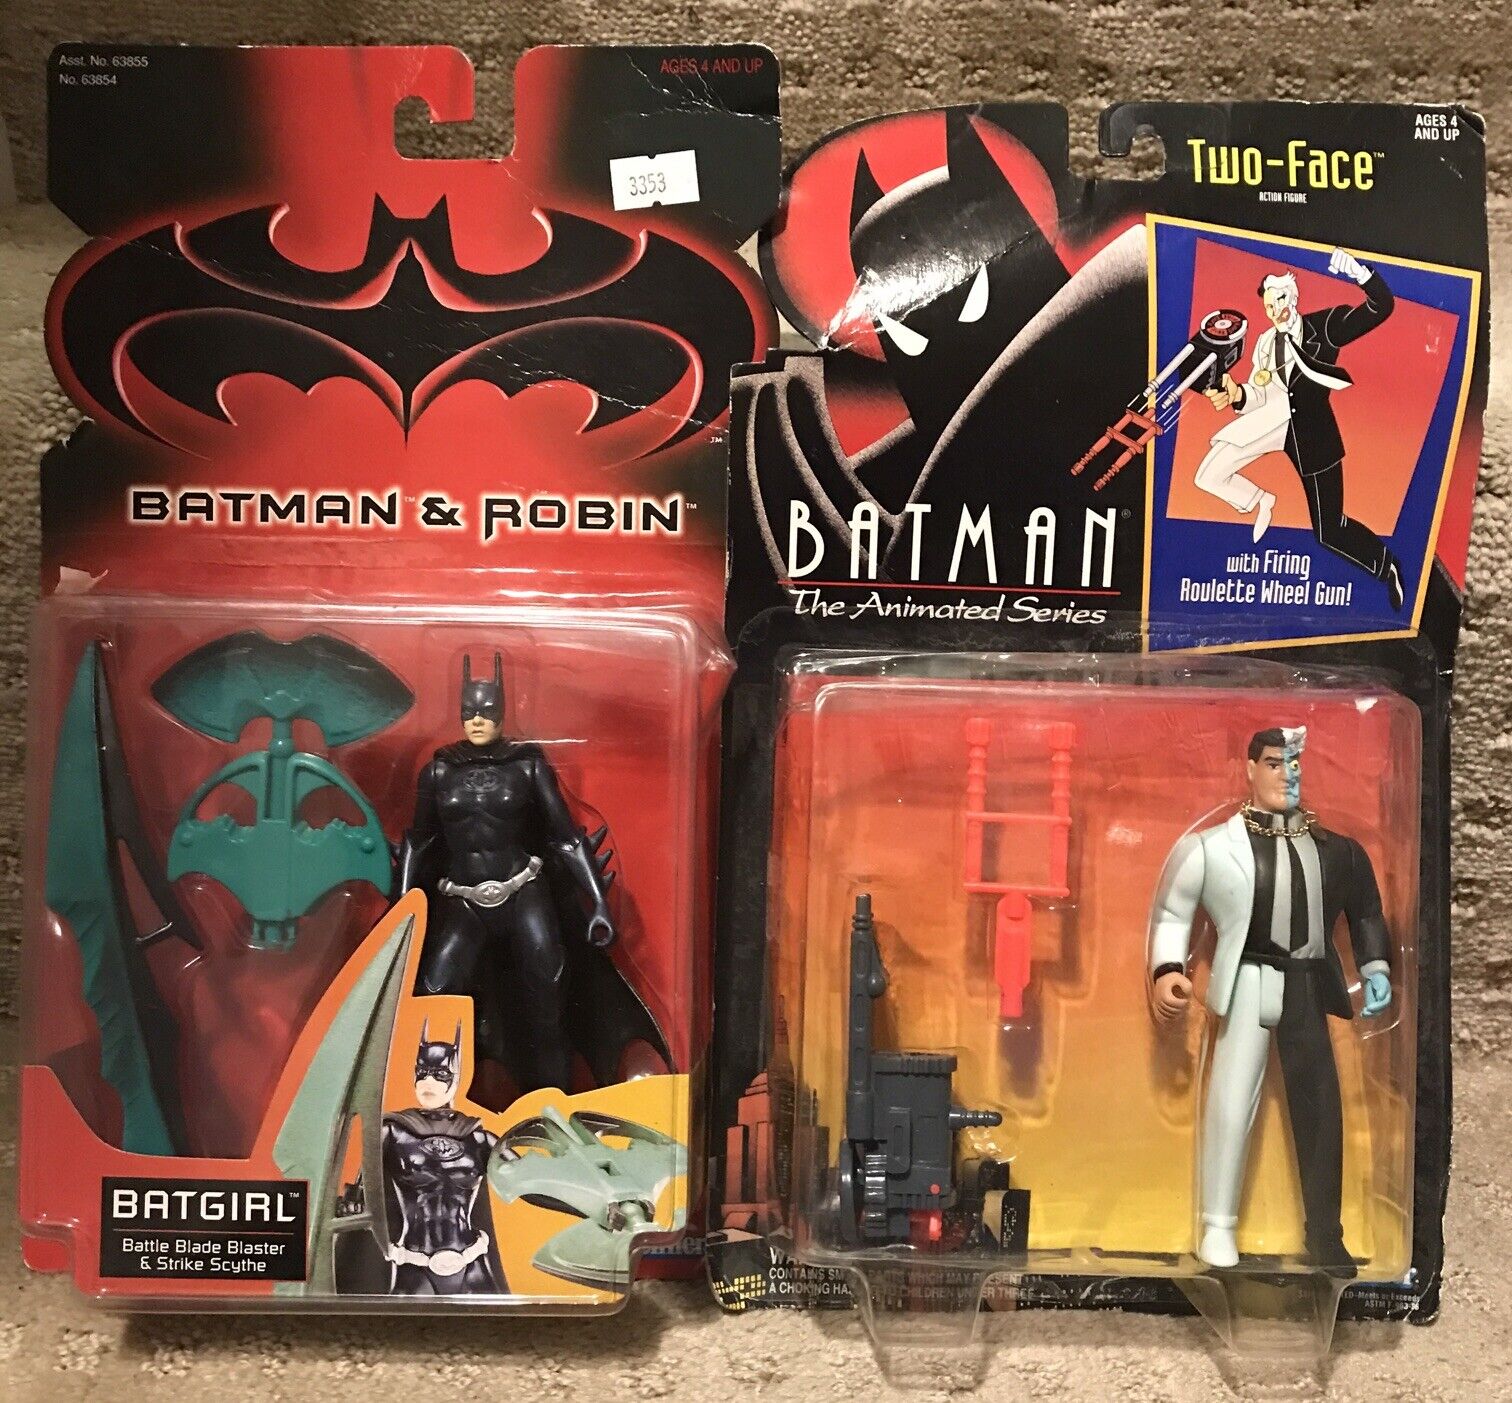 Vintage Kenner Batman The Animated Series Two-Face Action Figure With Batgirl